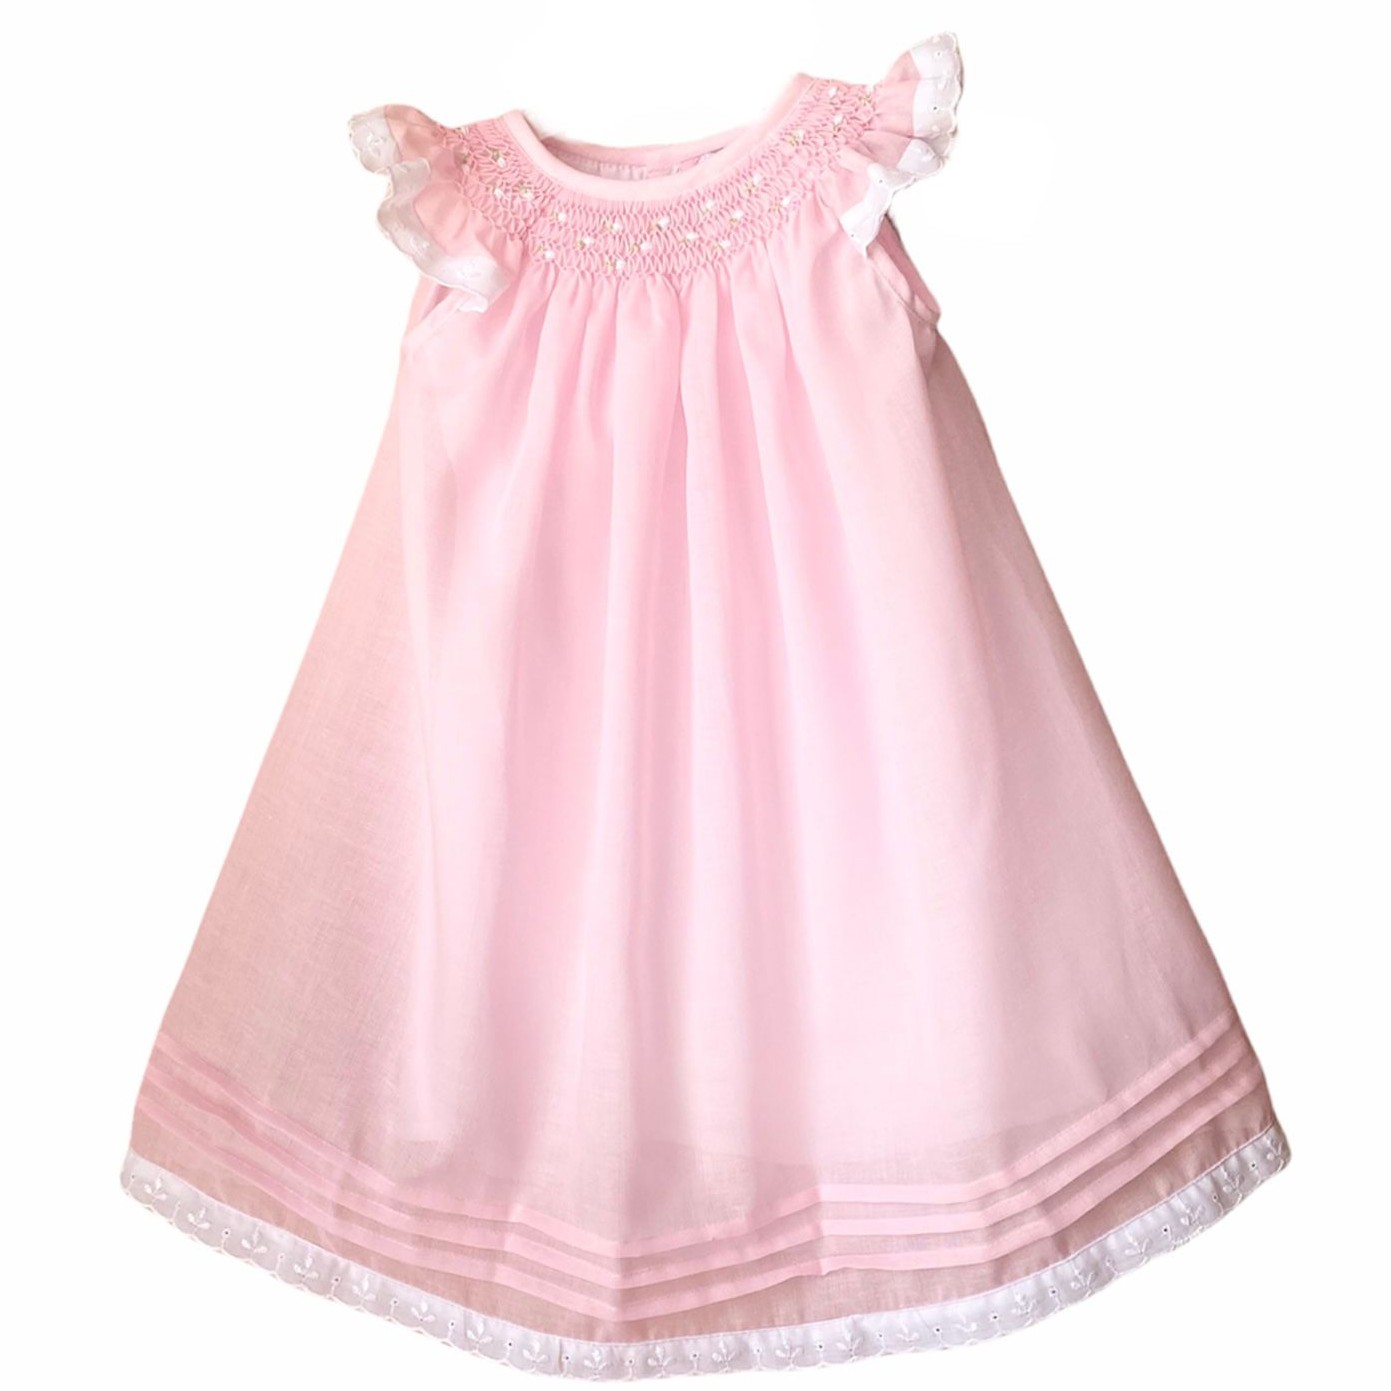 Girl's Dress with Hand Embroidery -  Pink Color with White Embroidery